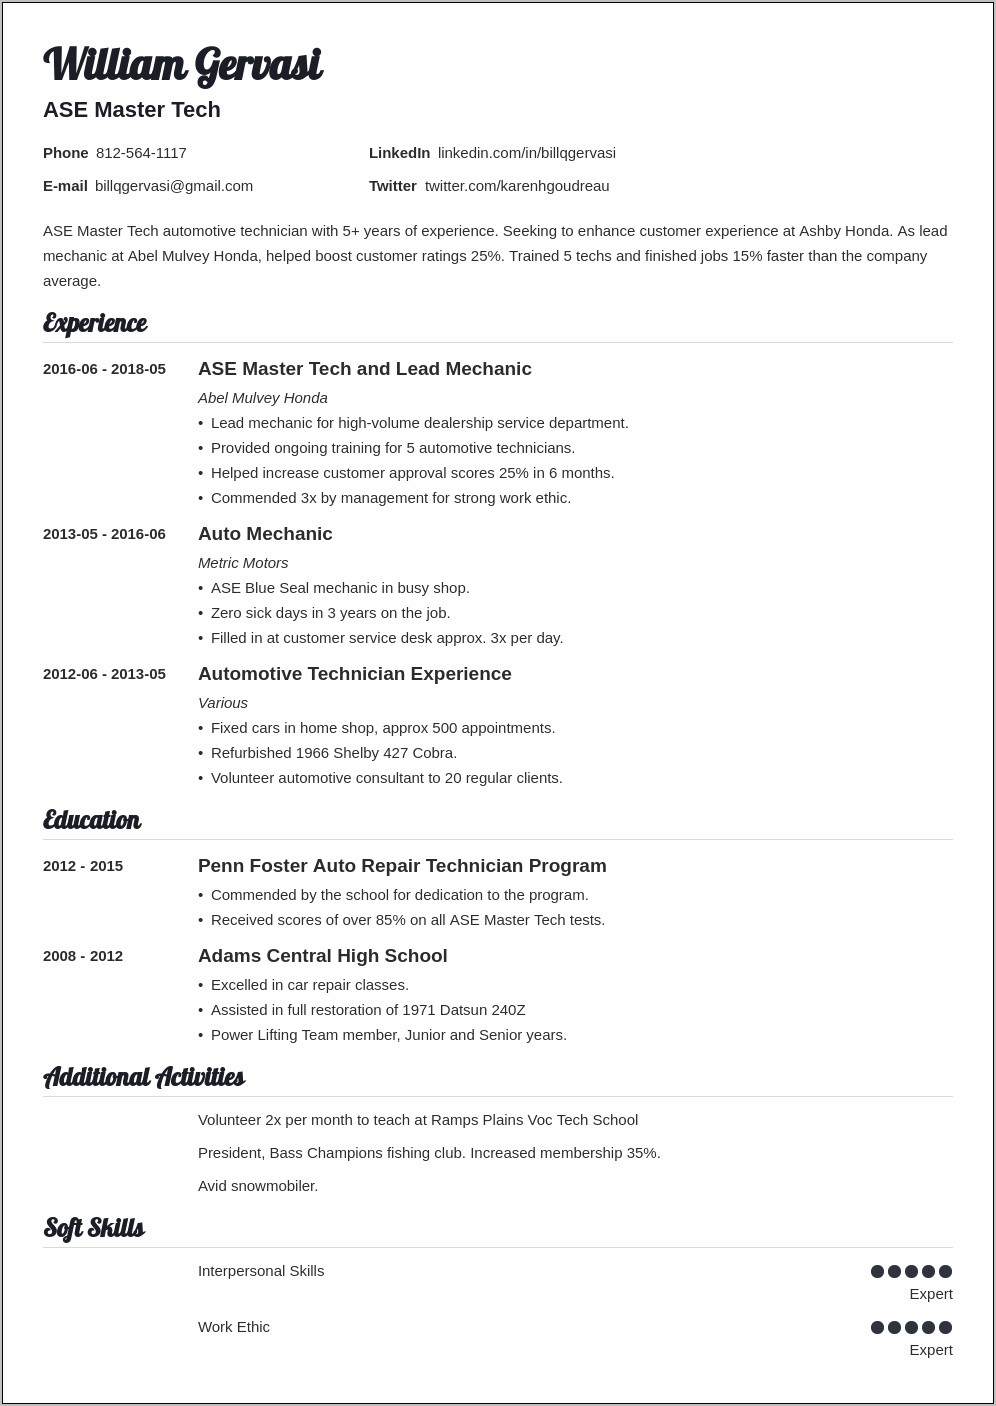 Example Resume For A Automotive Regional Manager